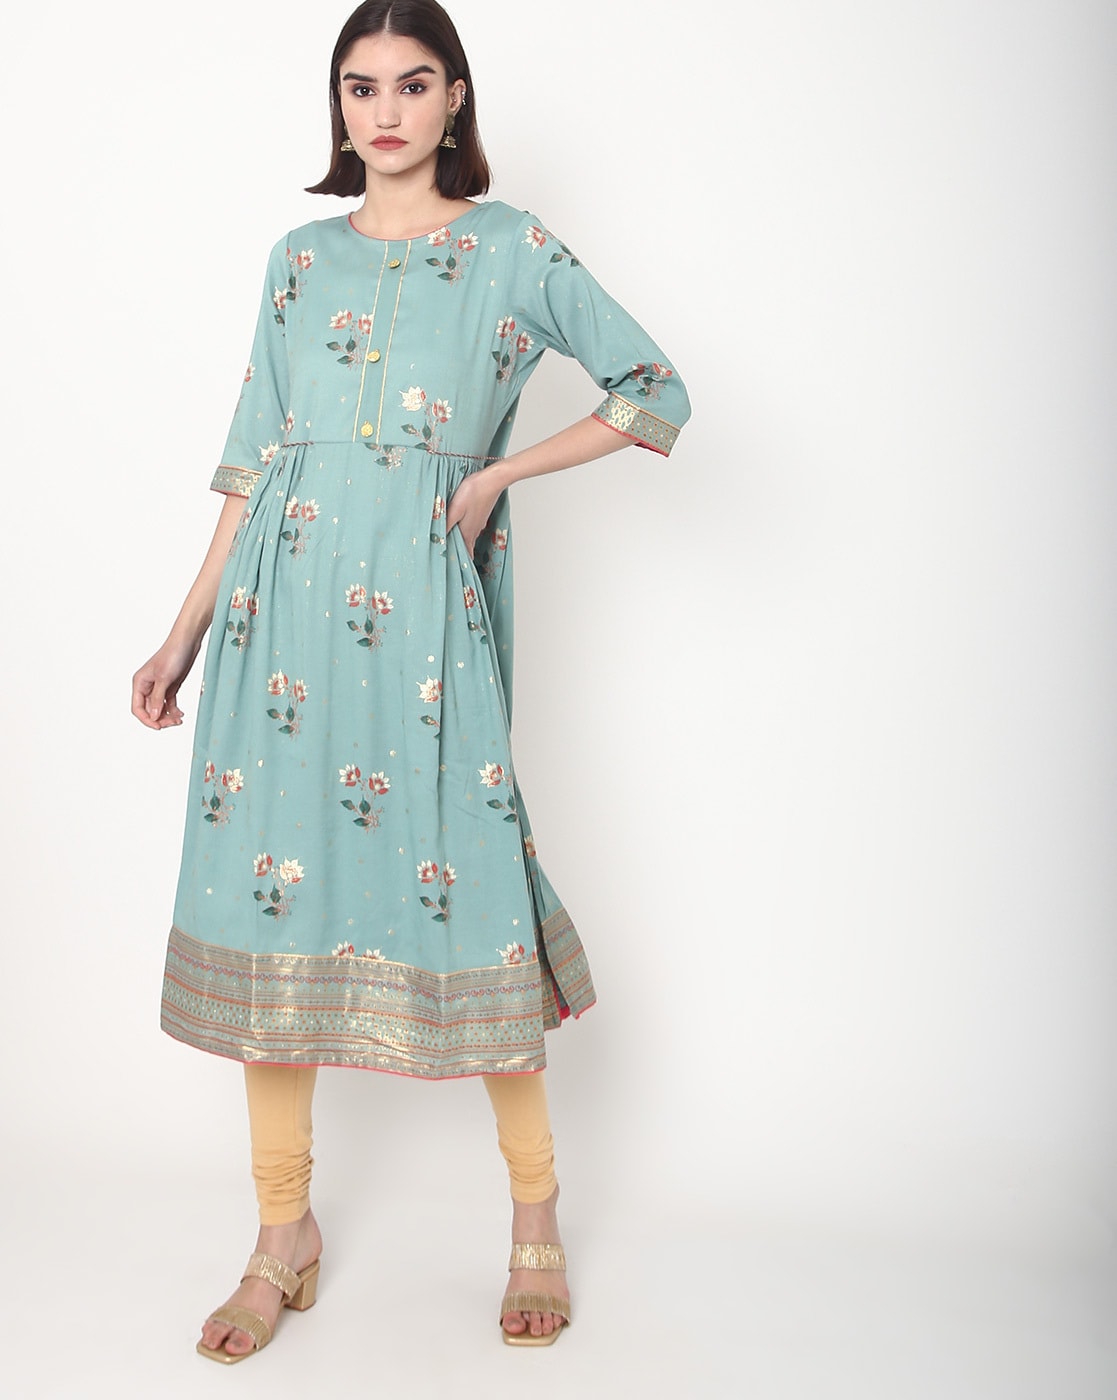 Discover more than 76 trends womens kurti best